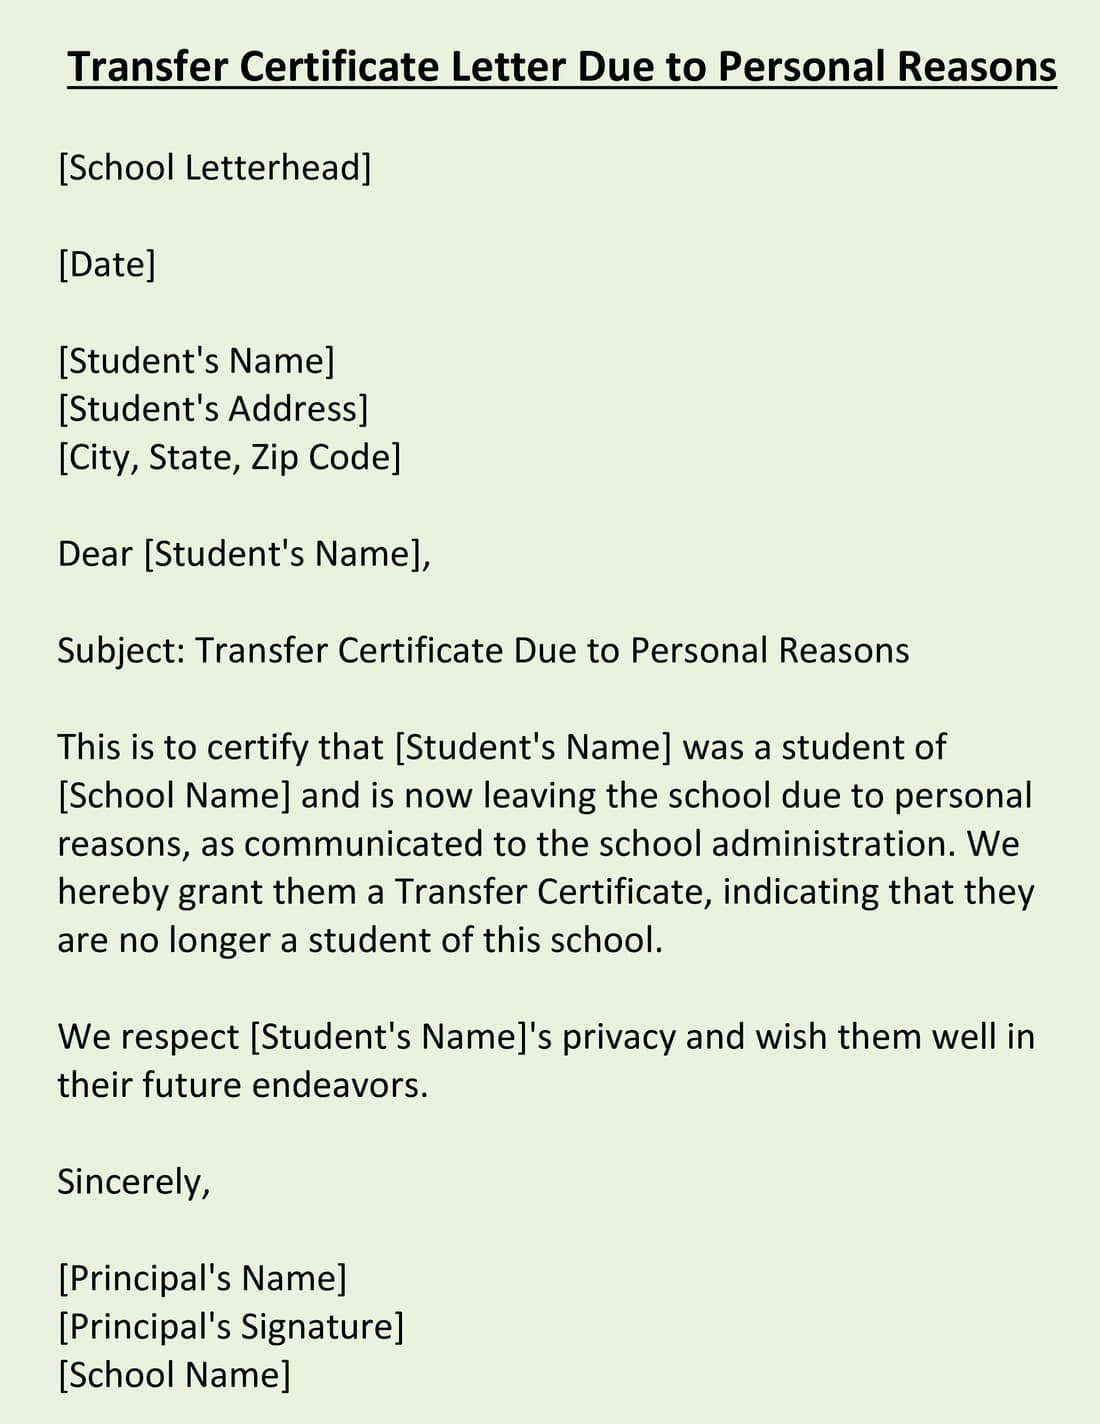 Transfer Certificate Letter Due to Personal Reasons